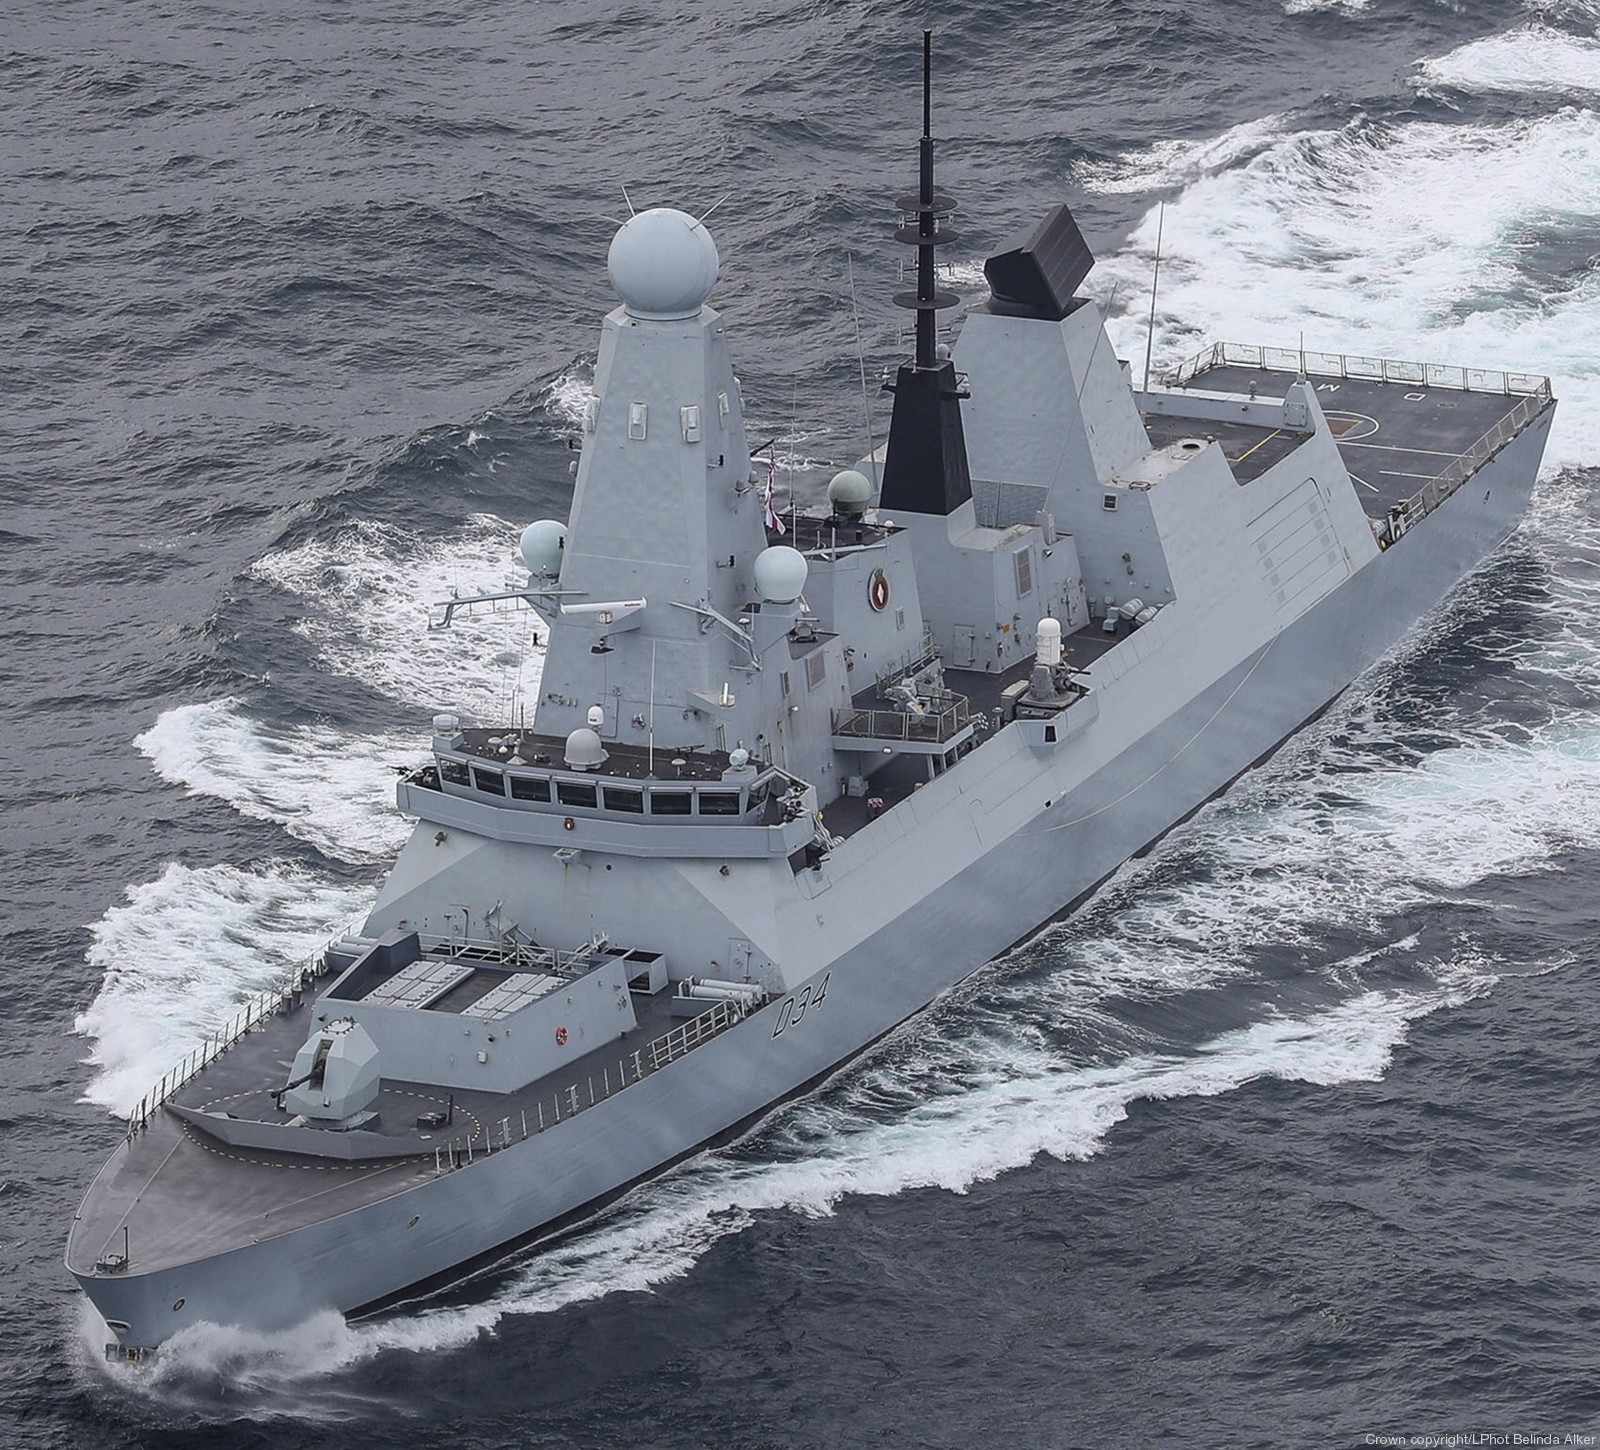 d34 hms diamond d-34 type 45 daring class guided missile destroyer ddg royal navy sea viper paams 47